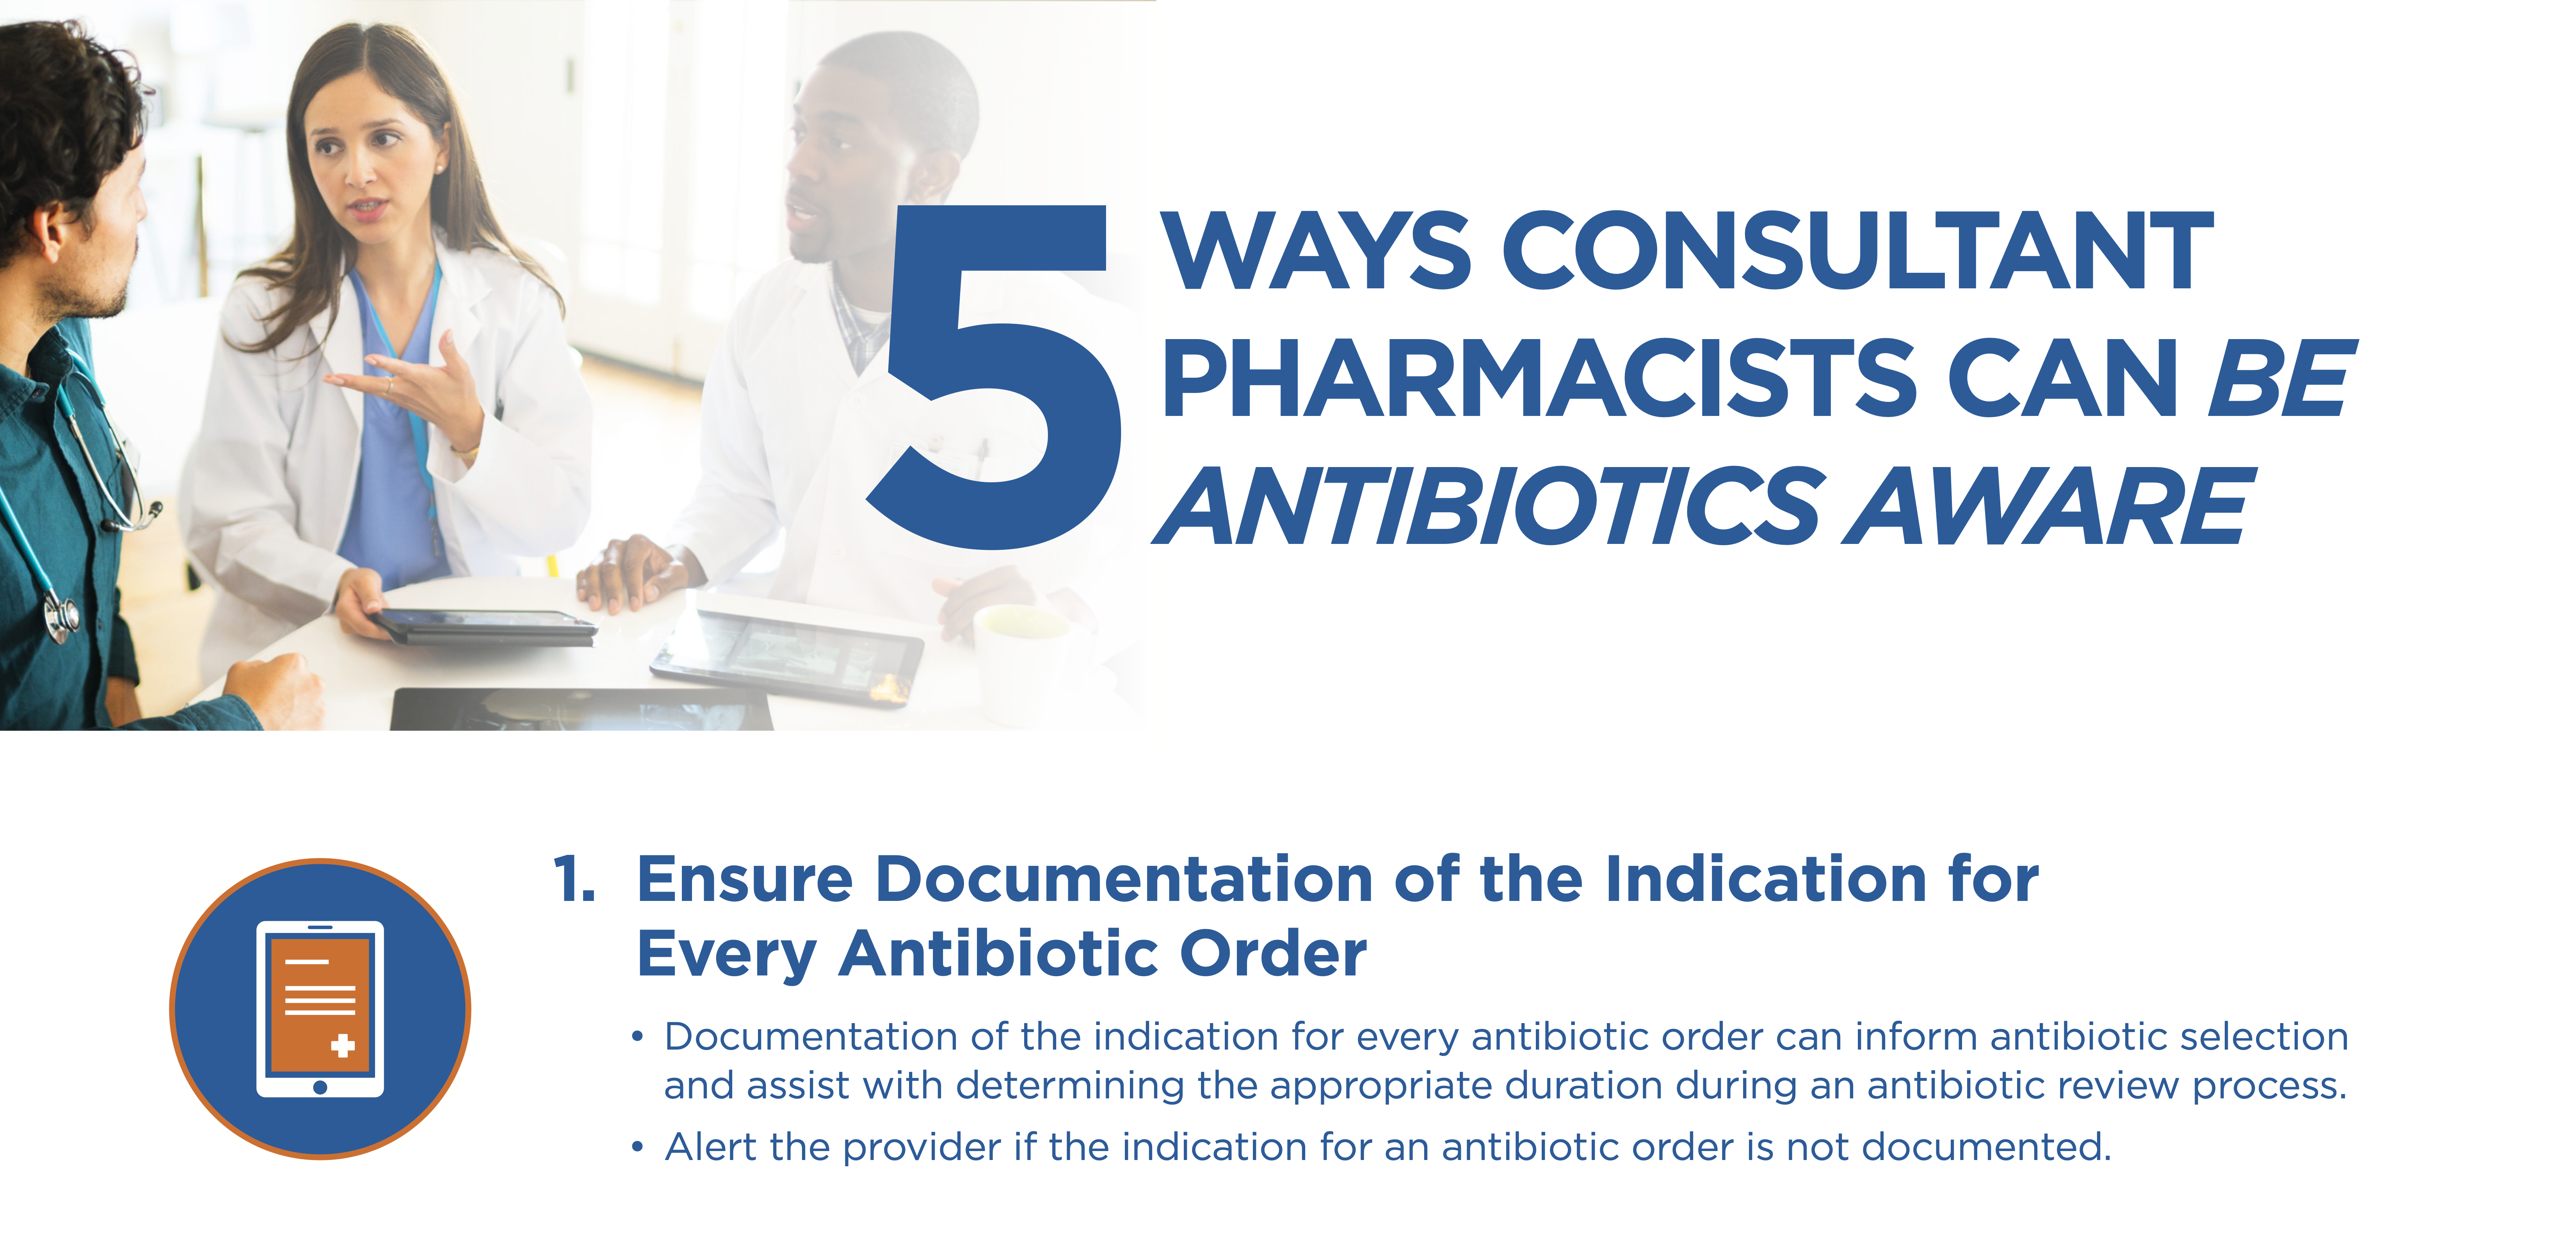 5 Ways Consultant Pharmacists Can Be Antibiotics Aware - Poster